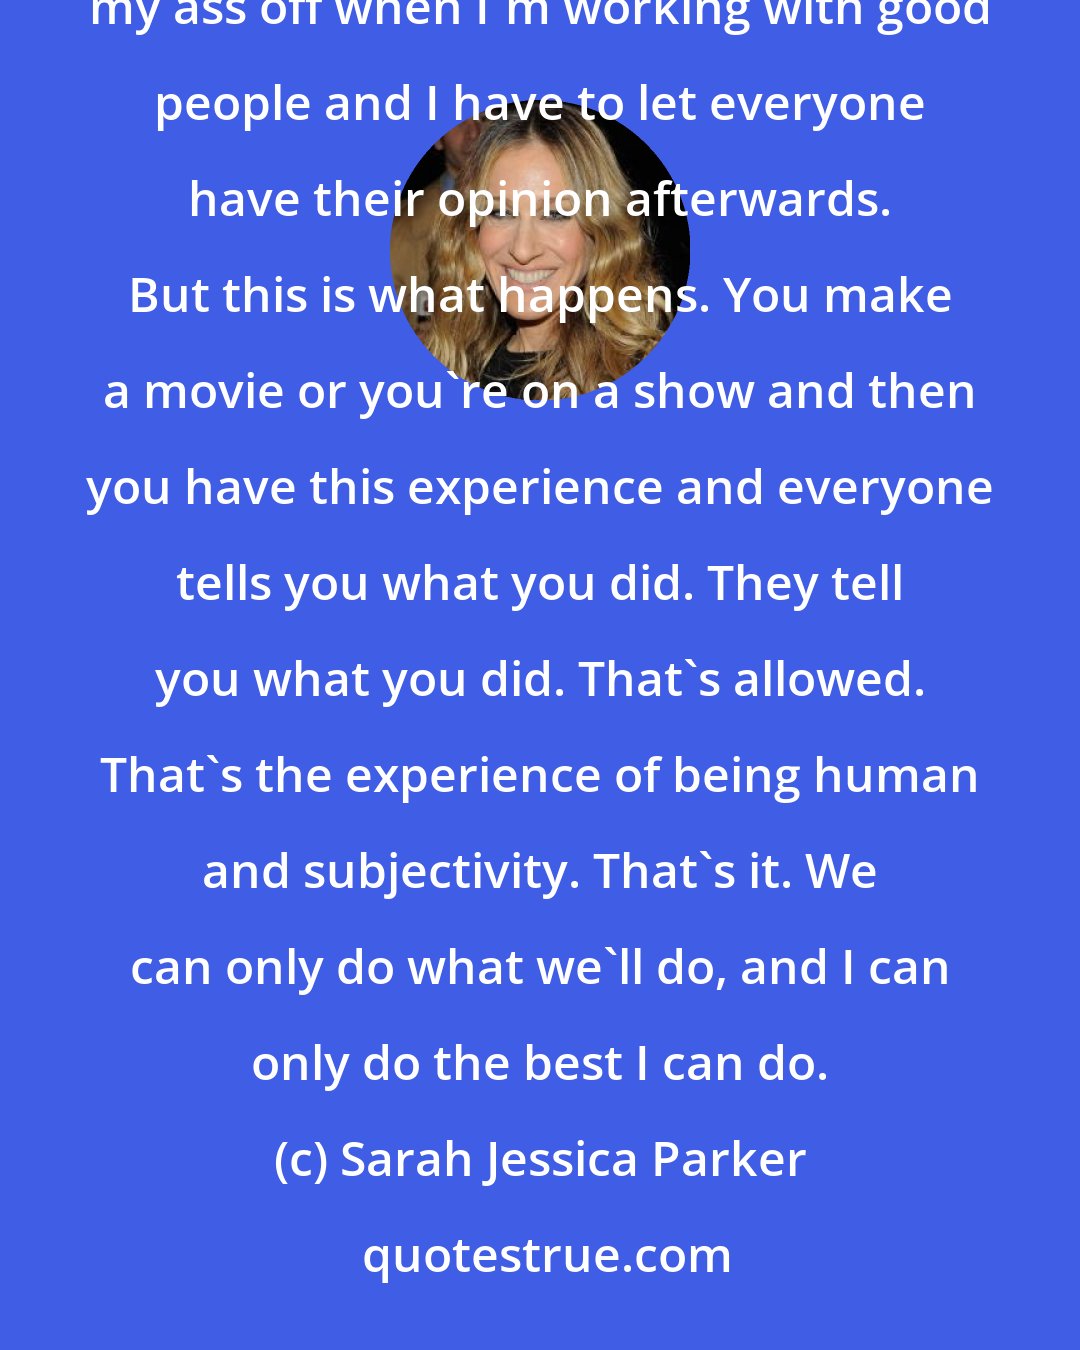 Sarah Jessica Parker: I think it's incumbent upon me to try to be smart and make good choices and work with good people and work my ass off when I'm working with good people and I have to let everyone have their opinion afterwards. But this is what happens. You make a movie or you're on a show and then you have this experience and everyone tells you what you did. They tell you what you did. That's allowed. That's the experience of being human and subjectivity. That's it. We can only do what we'll do, and I can only do the best I can do.